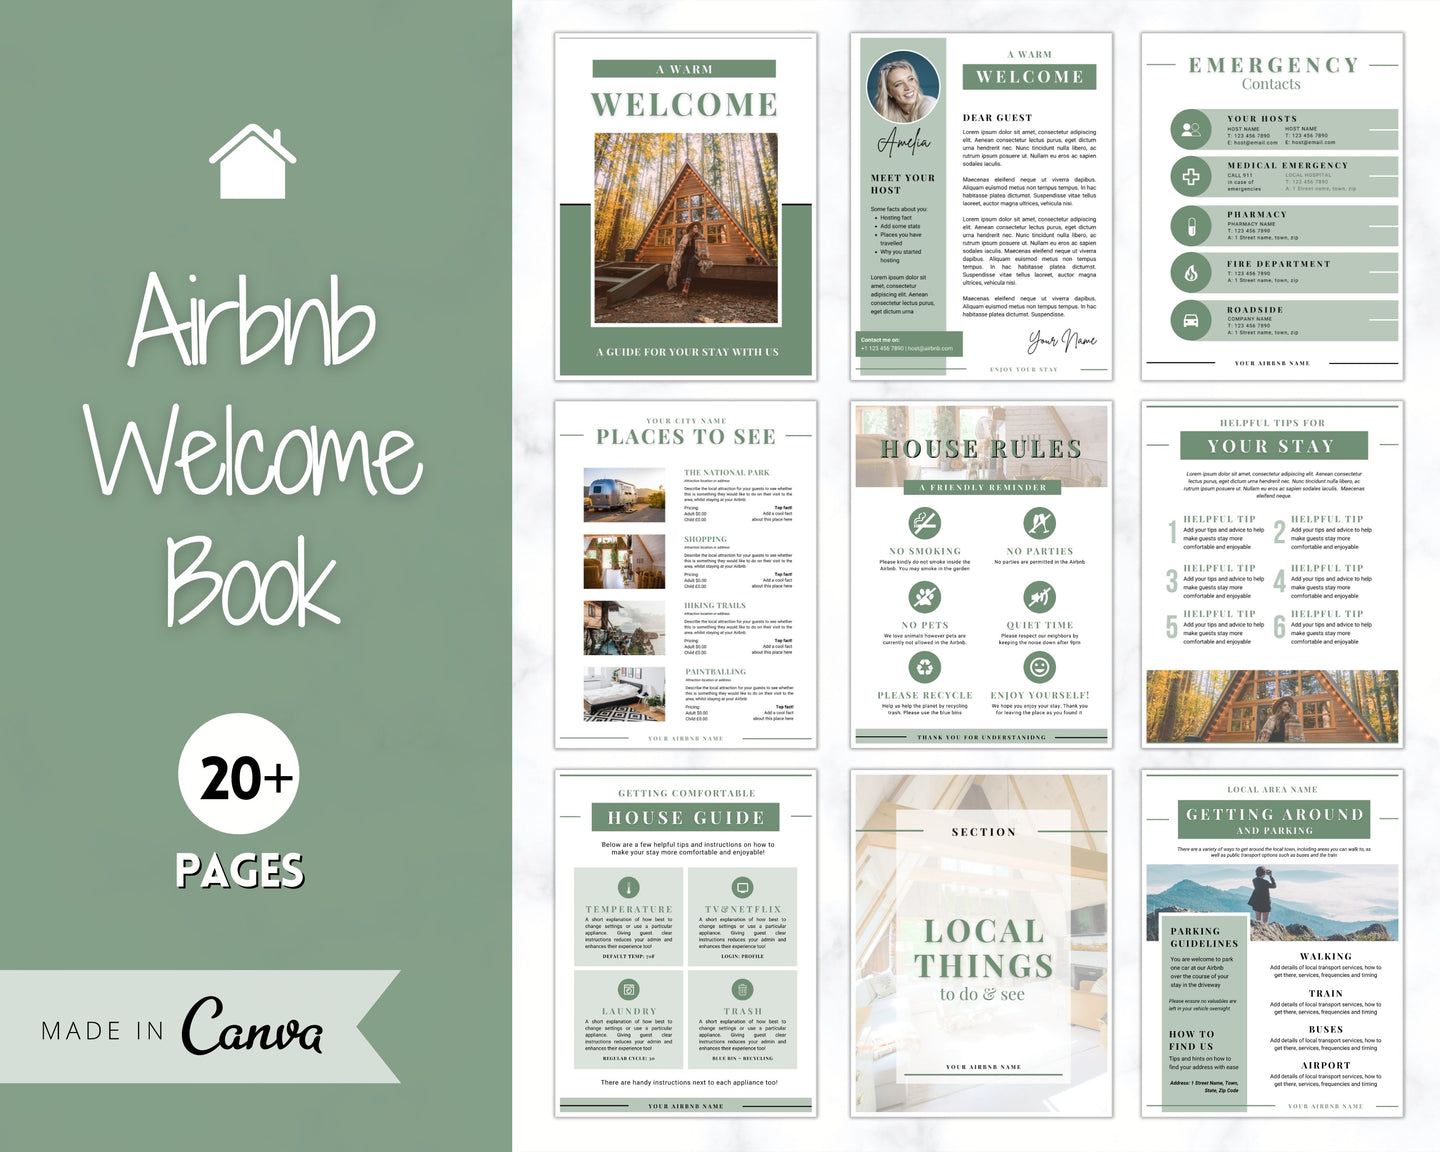 Welcome Book Template, Airbnb Welcome Guide, Editable Canva Air bnb House manual, Superhost eBook, Host signs, Signage, VRBO Vacation Rental | Green Style 2